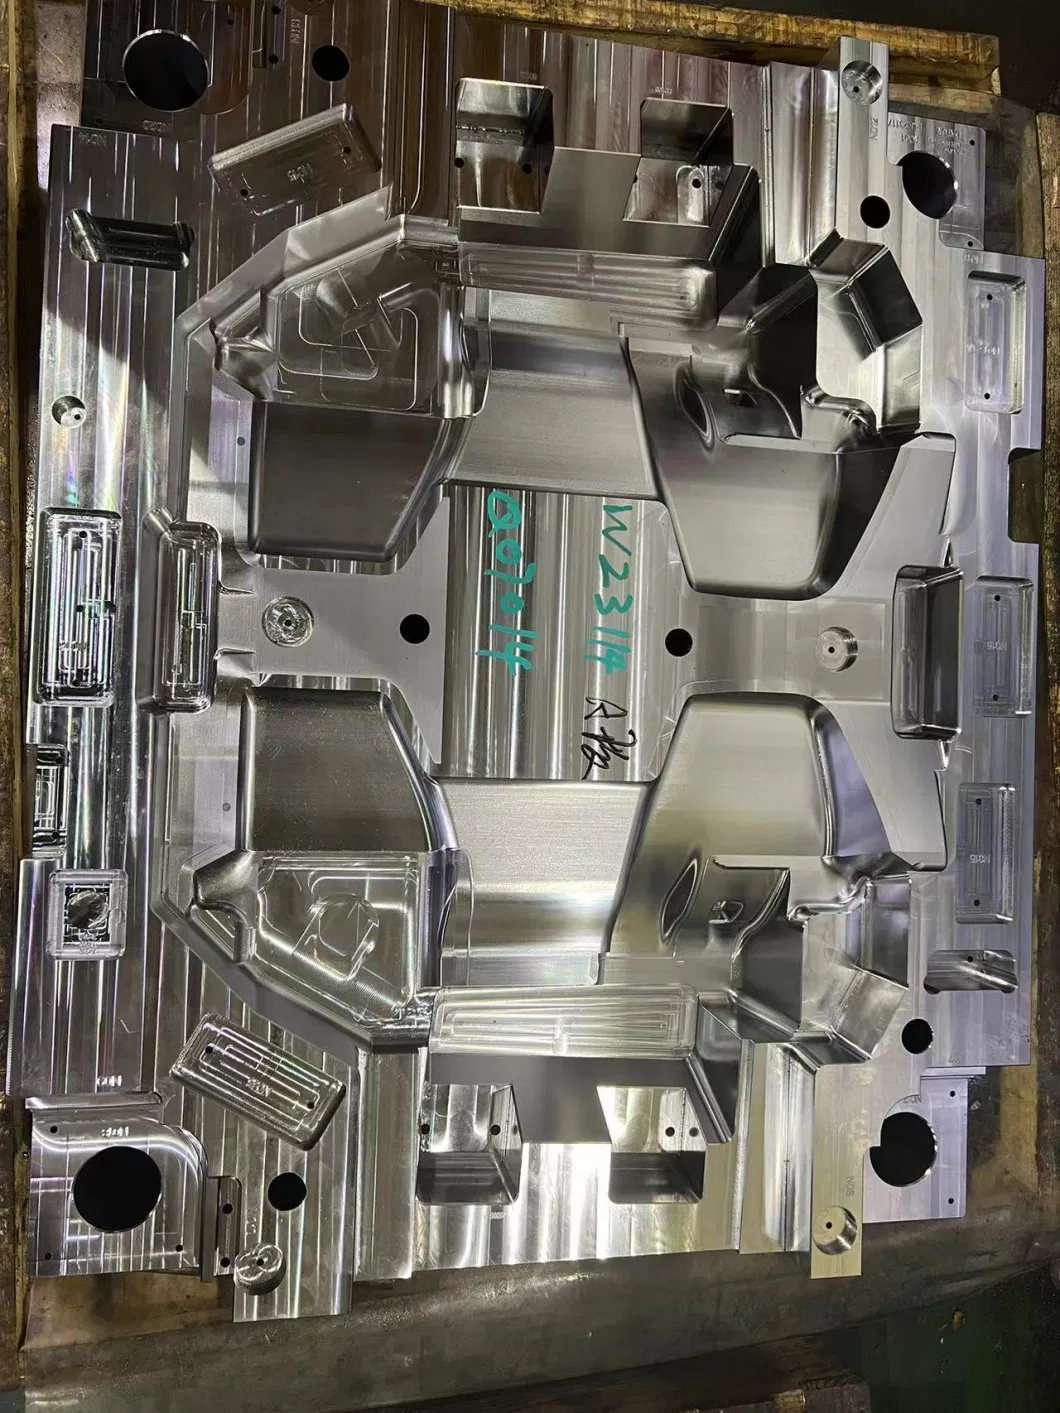 Non Standard CNC Machined Plastic Injection Mould Base S50c Mold Base According to Drawings